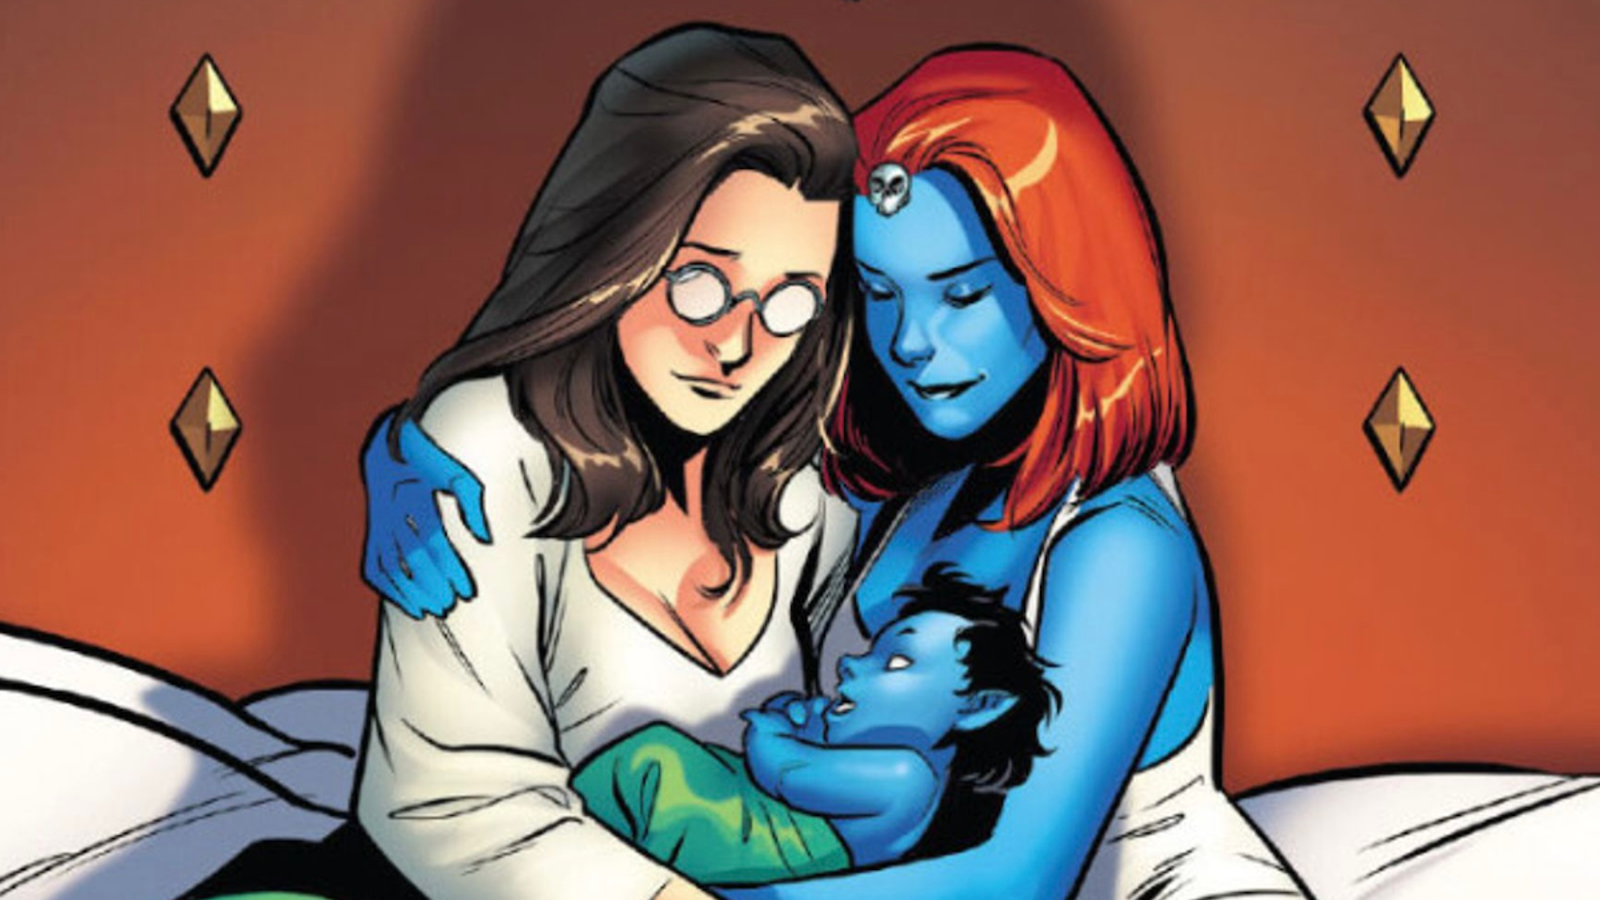 Is Marvel's Mystique trans? What we should learn from latest X-Men twist